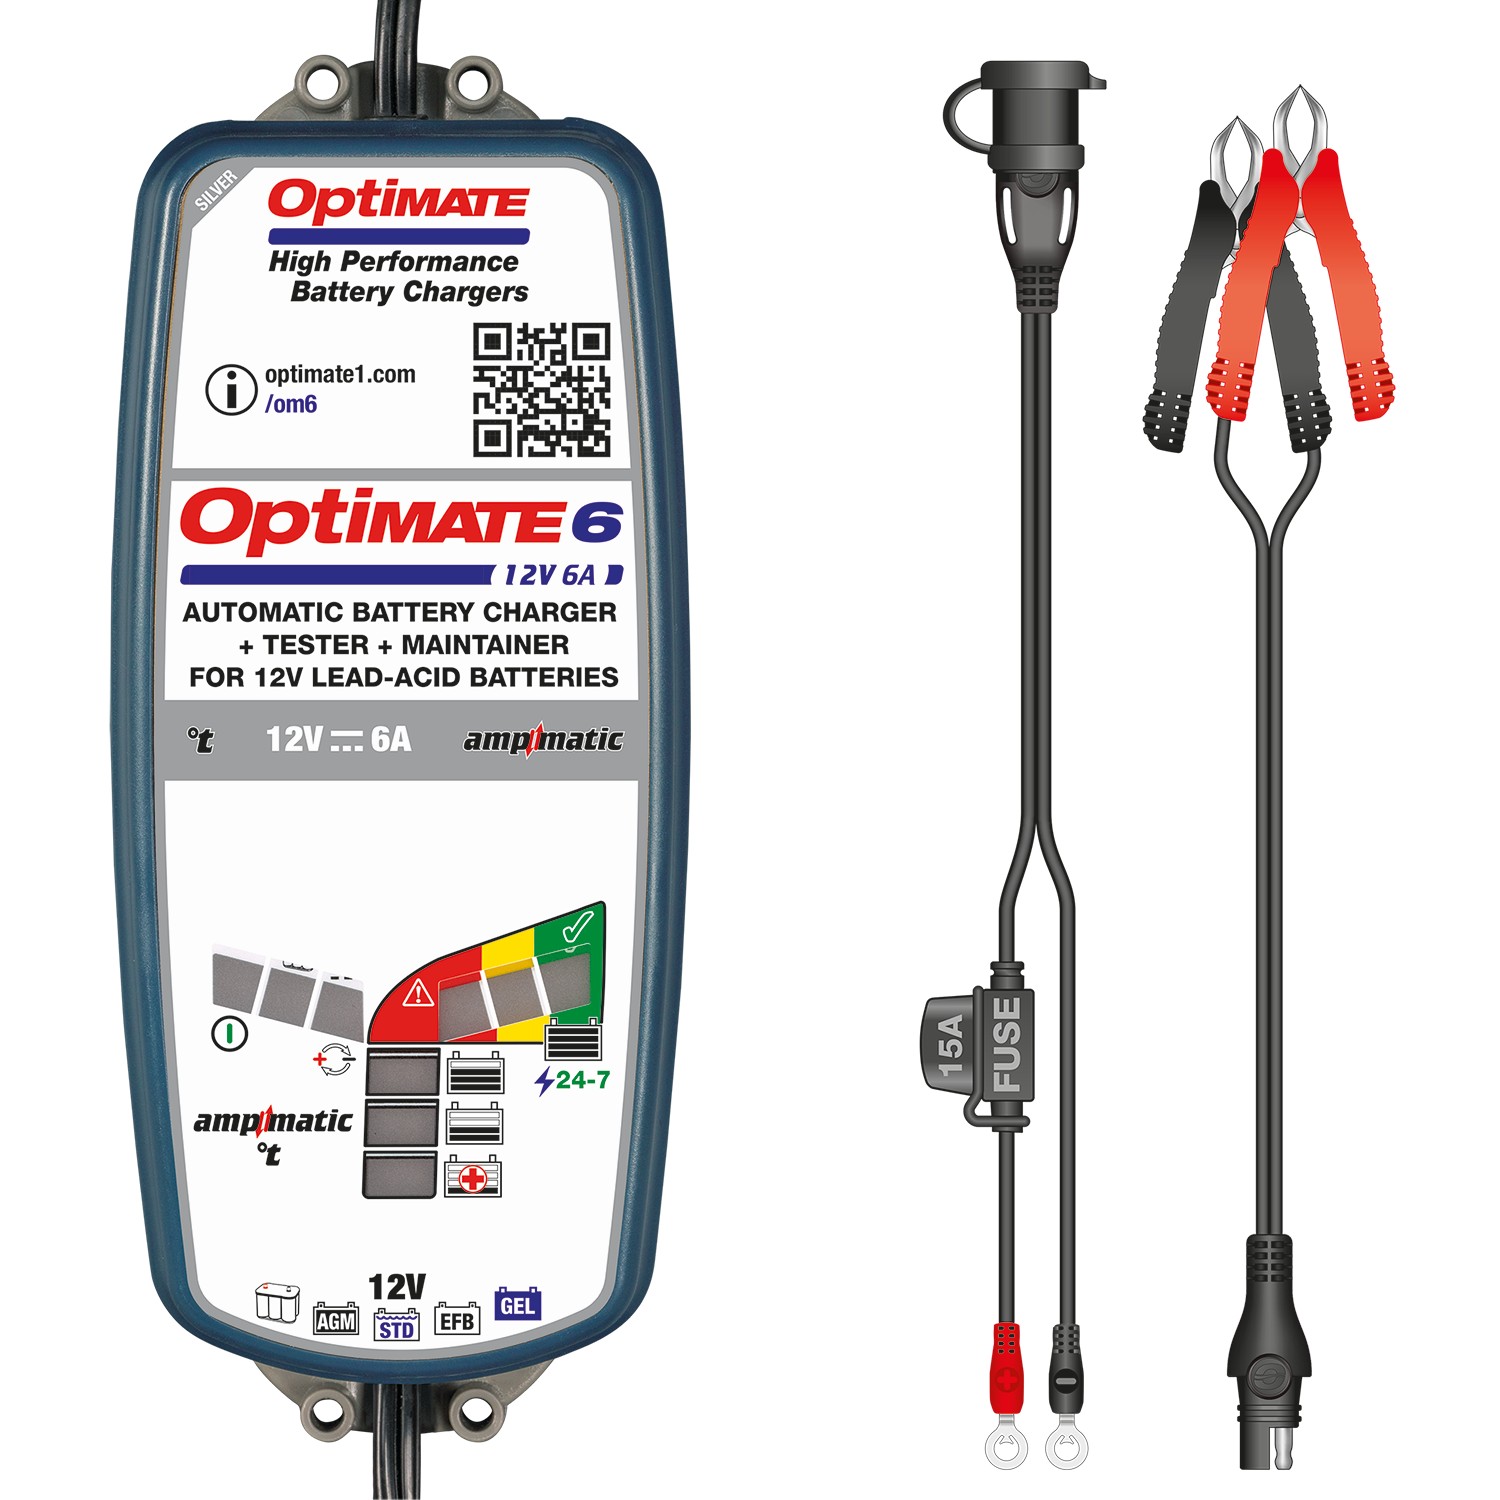 OptiMate 6 Ampmatic – テックメイトジャパン㈱ 公式HP OptiMate充電器